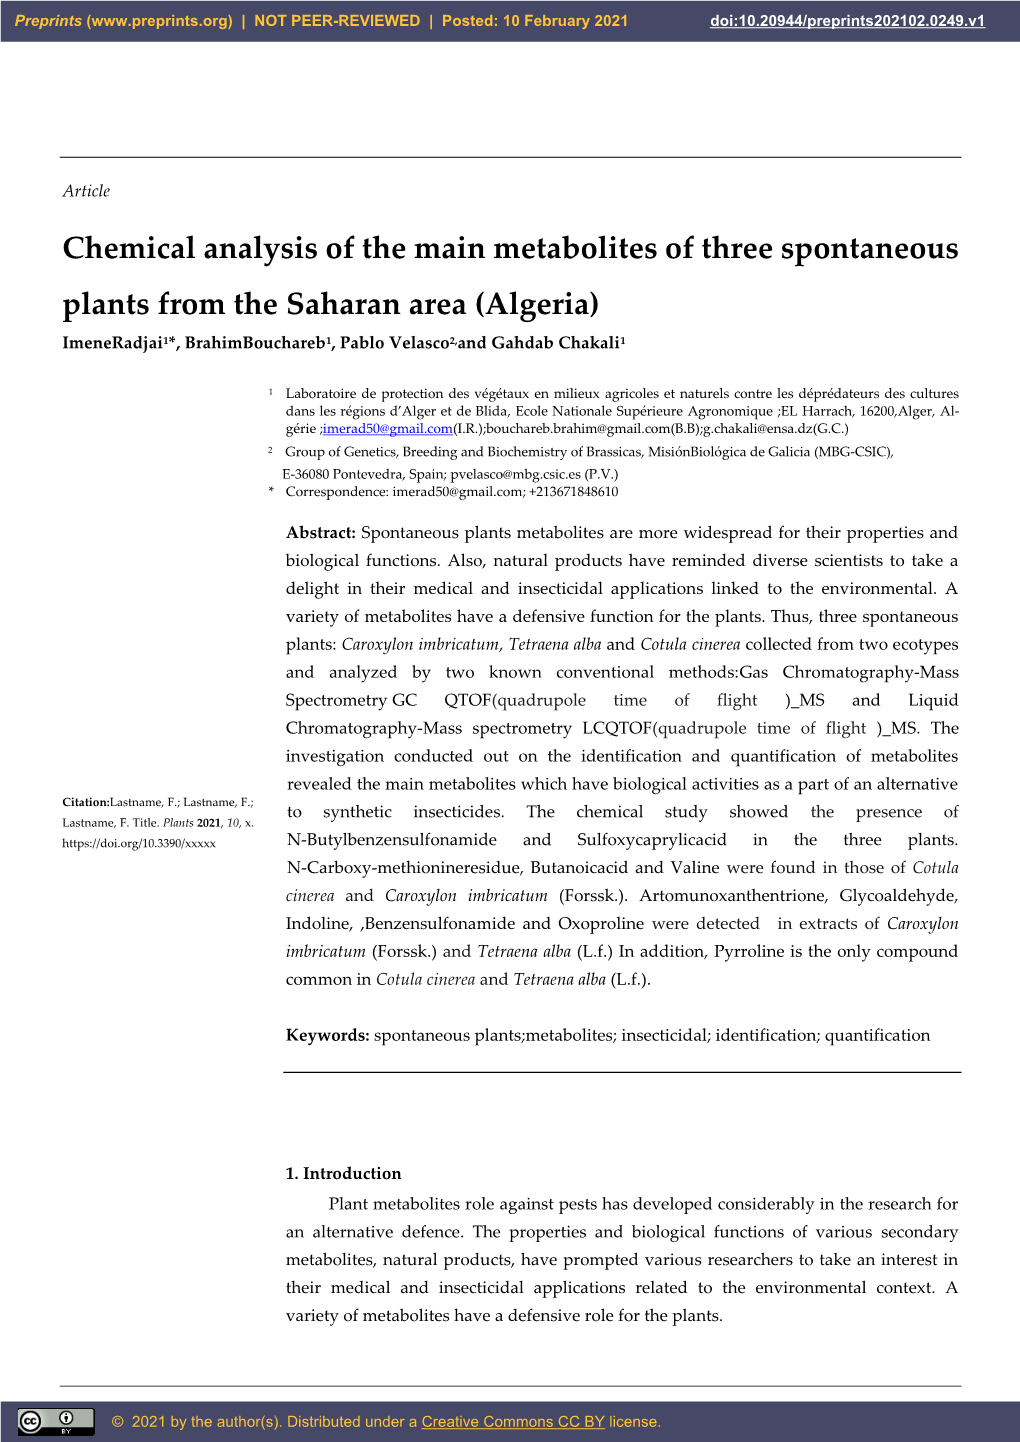 Chemical Analysis of the Main Metabolites of Three Spontaneous Plants from the Saharan Area